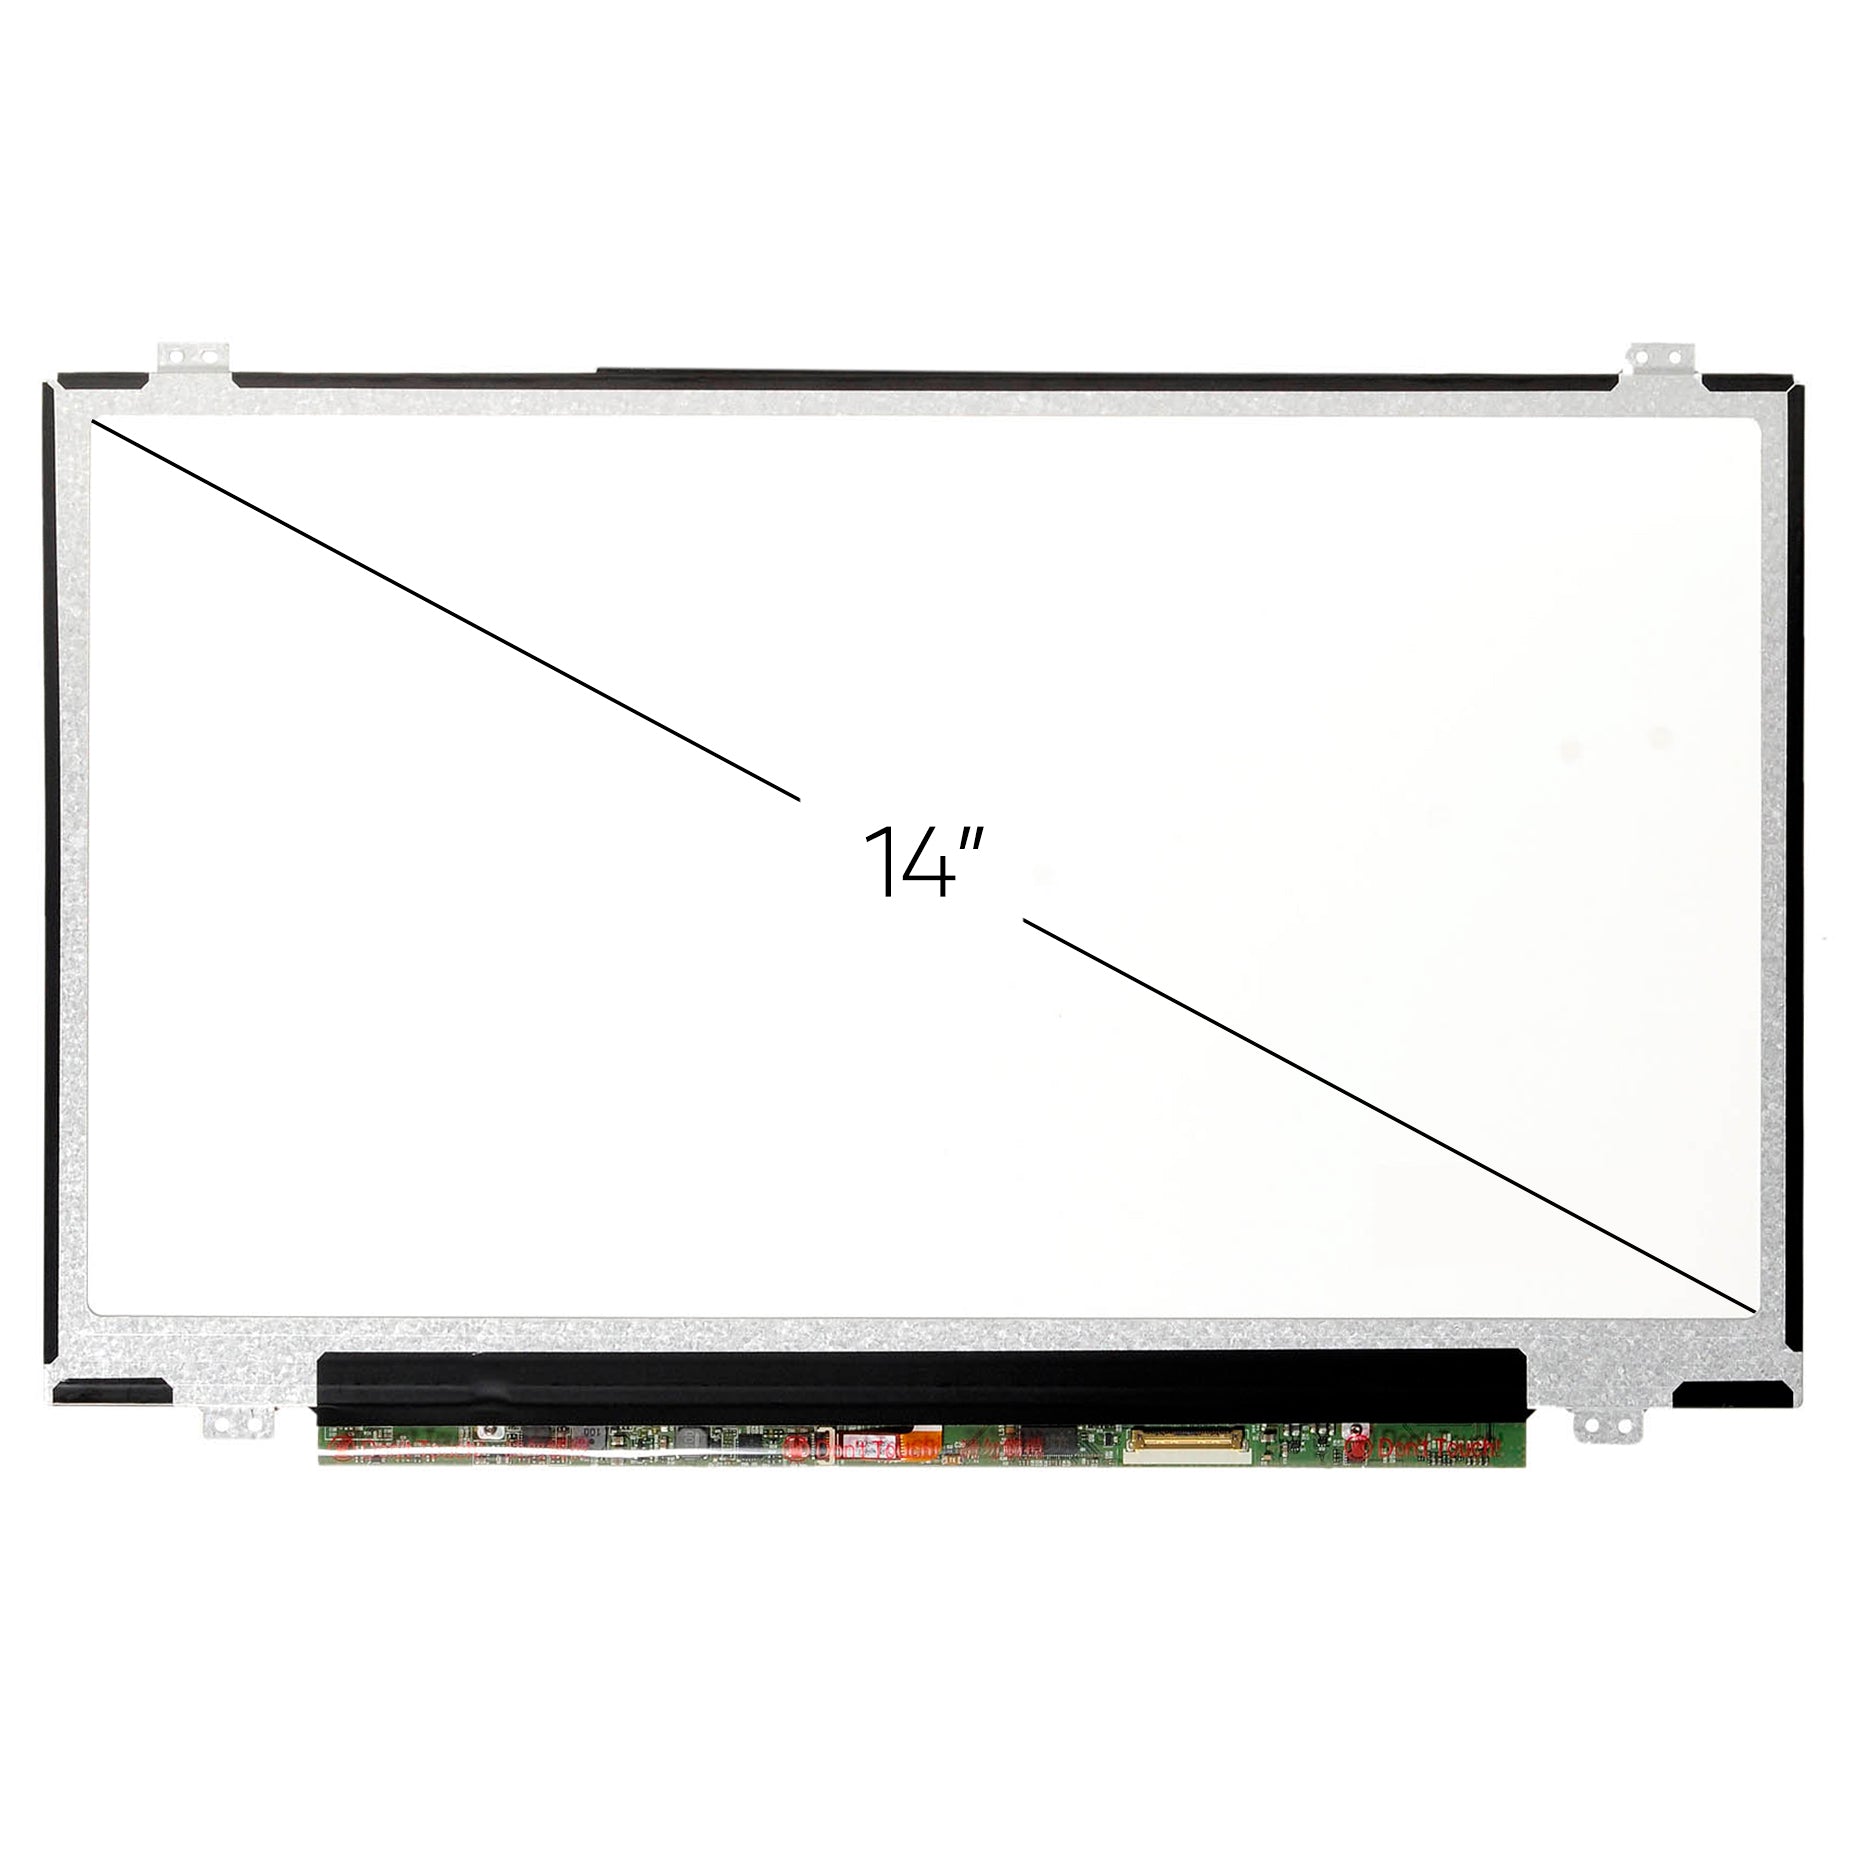 Screen Replacement for HP P/N L14348-001 FHD 1920x1080 IPS Matte LCD LED Display